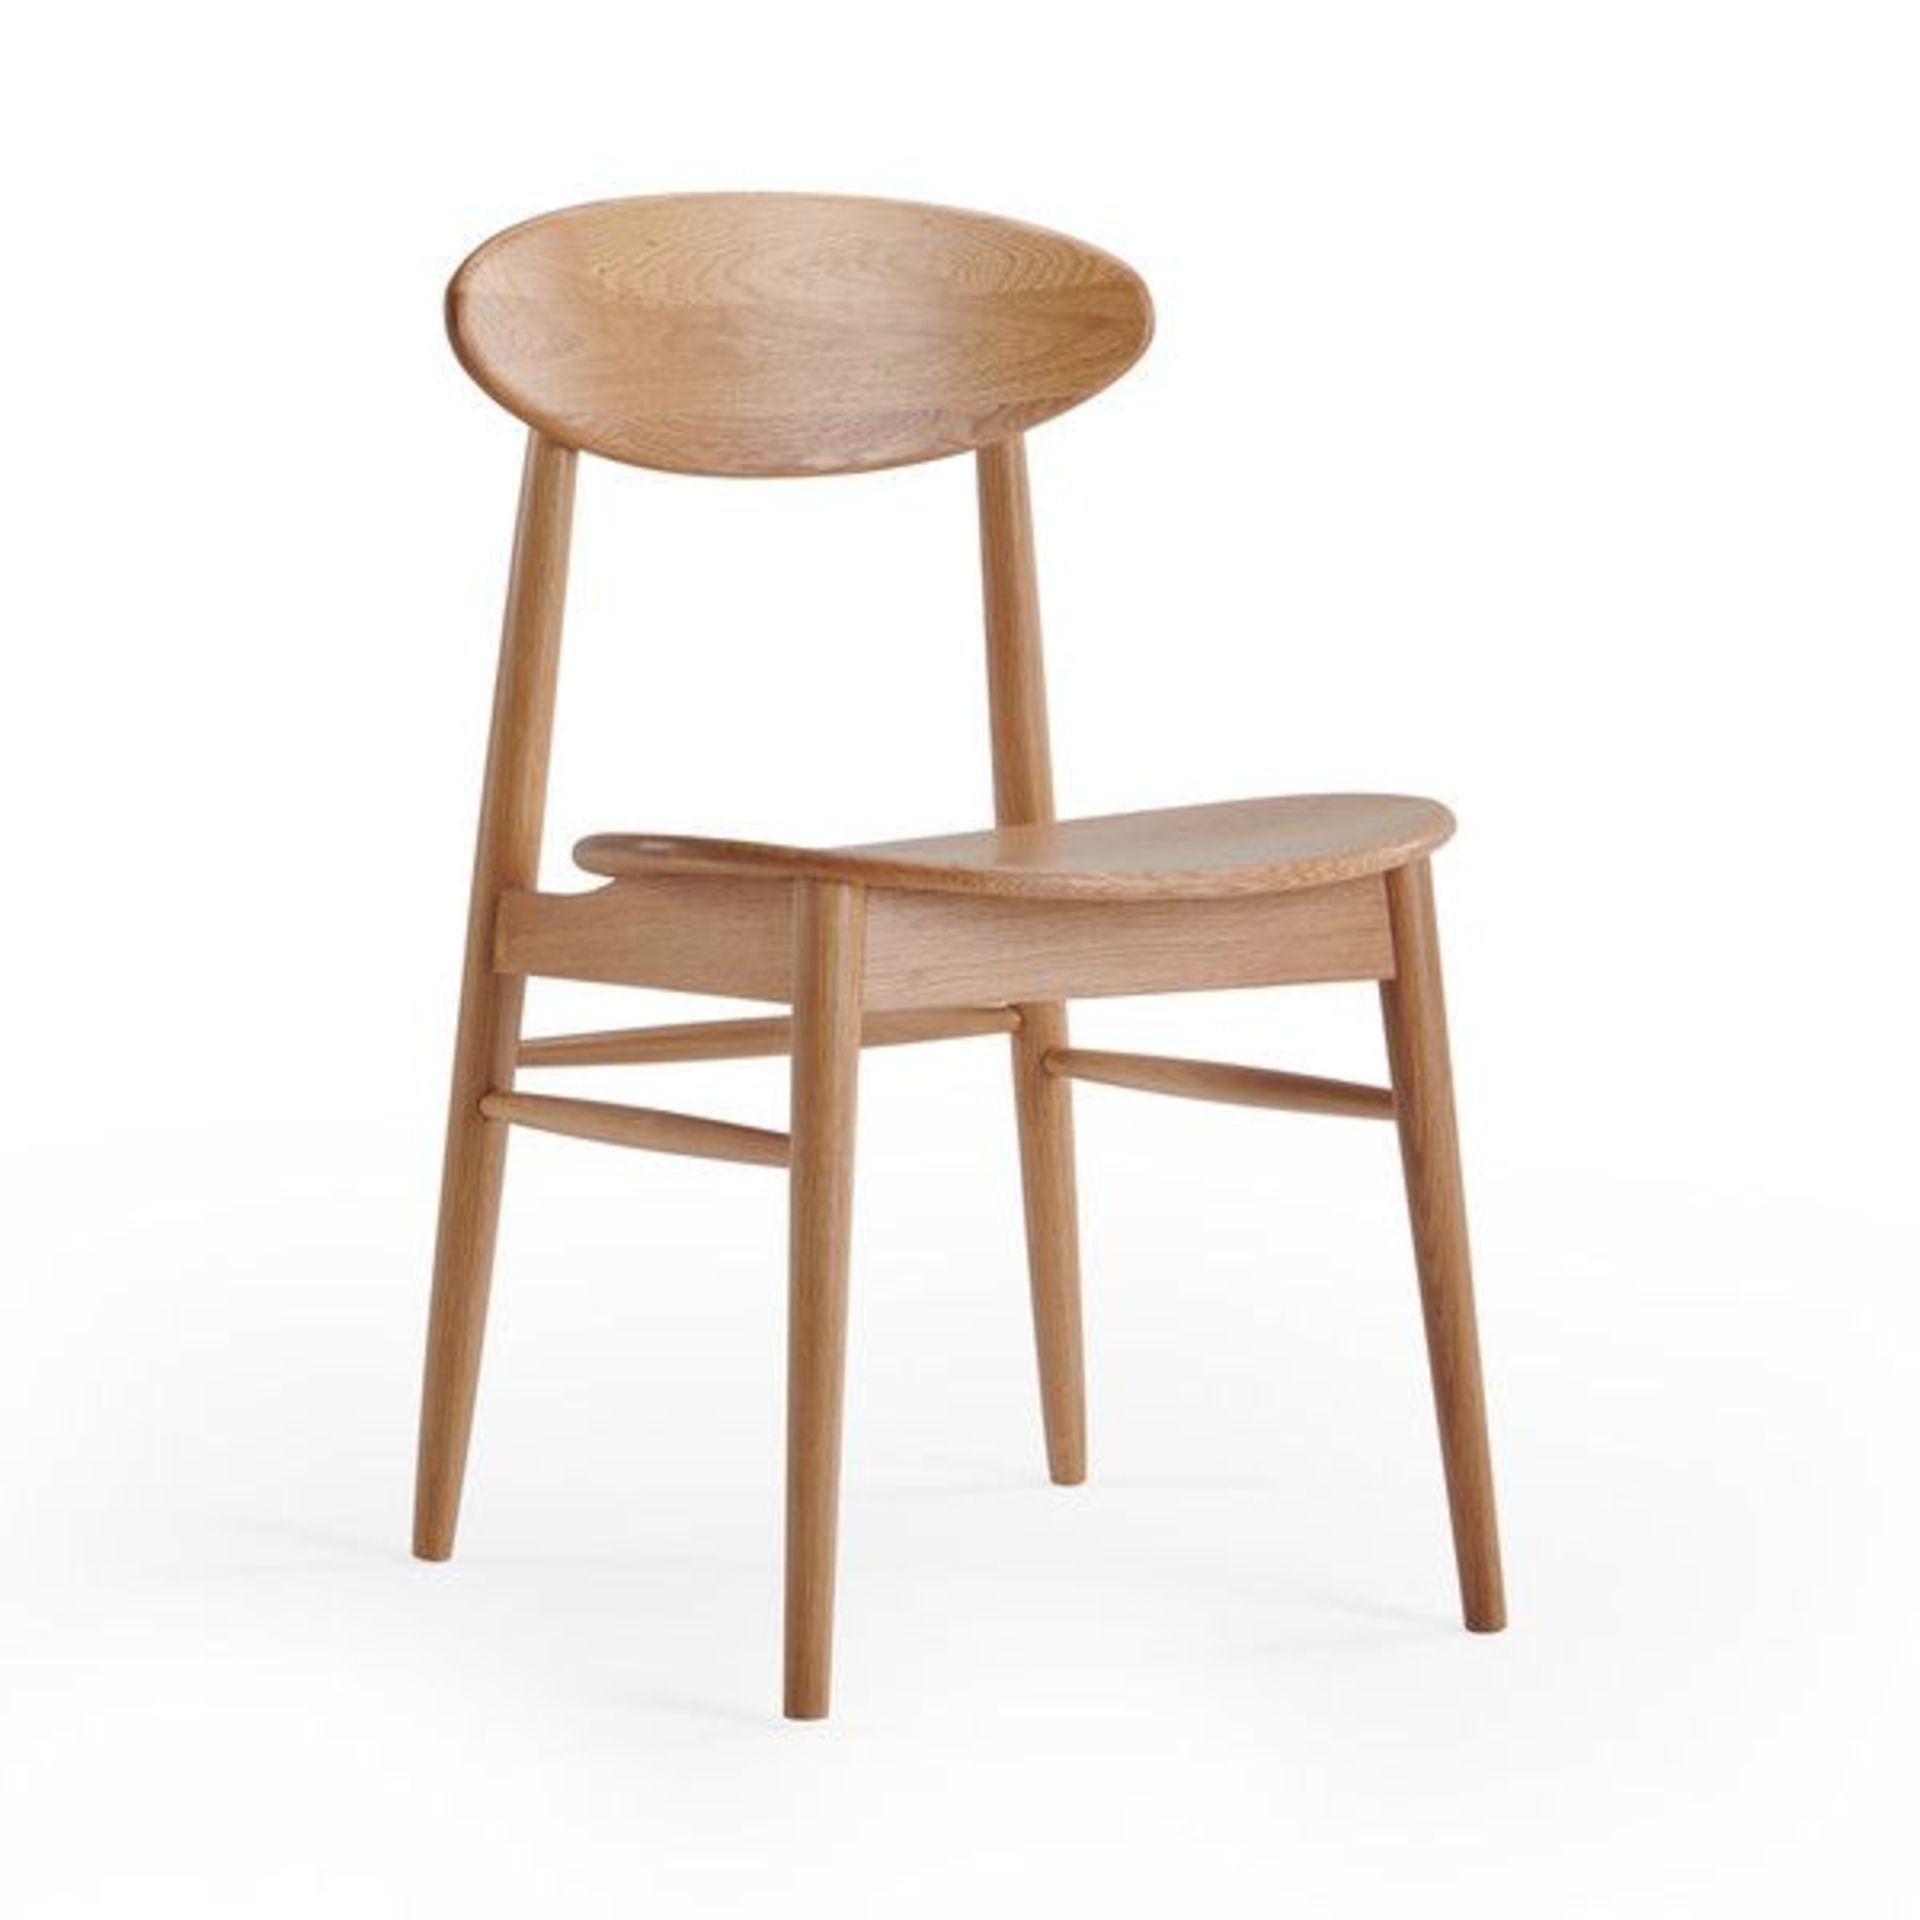 4 X NEW BOXED OSCAR SOLID OAK DINING CHAIRS. SET RRP £520. With its contemporary, yet versatile